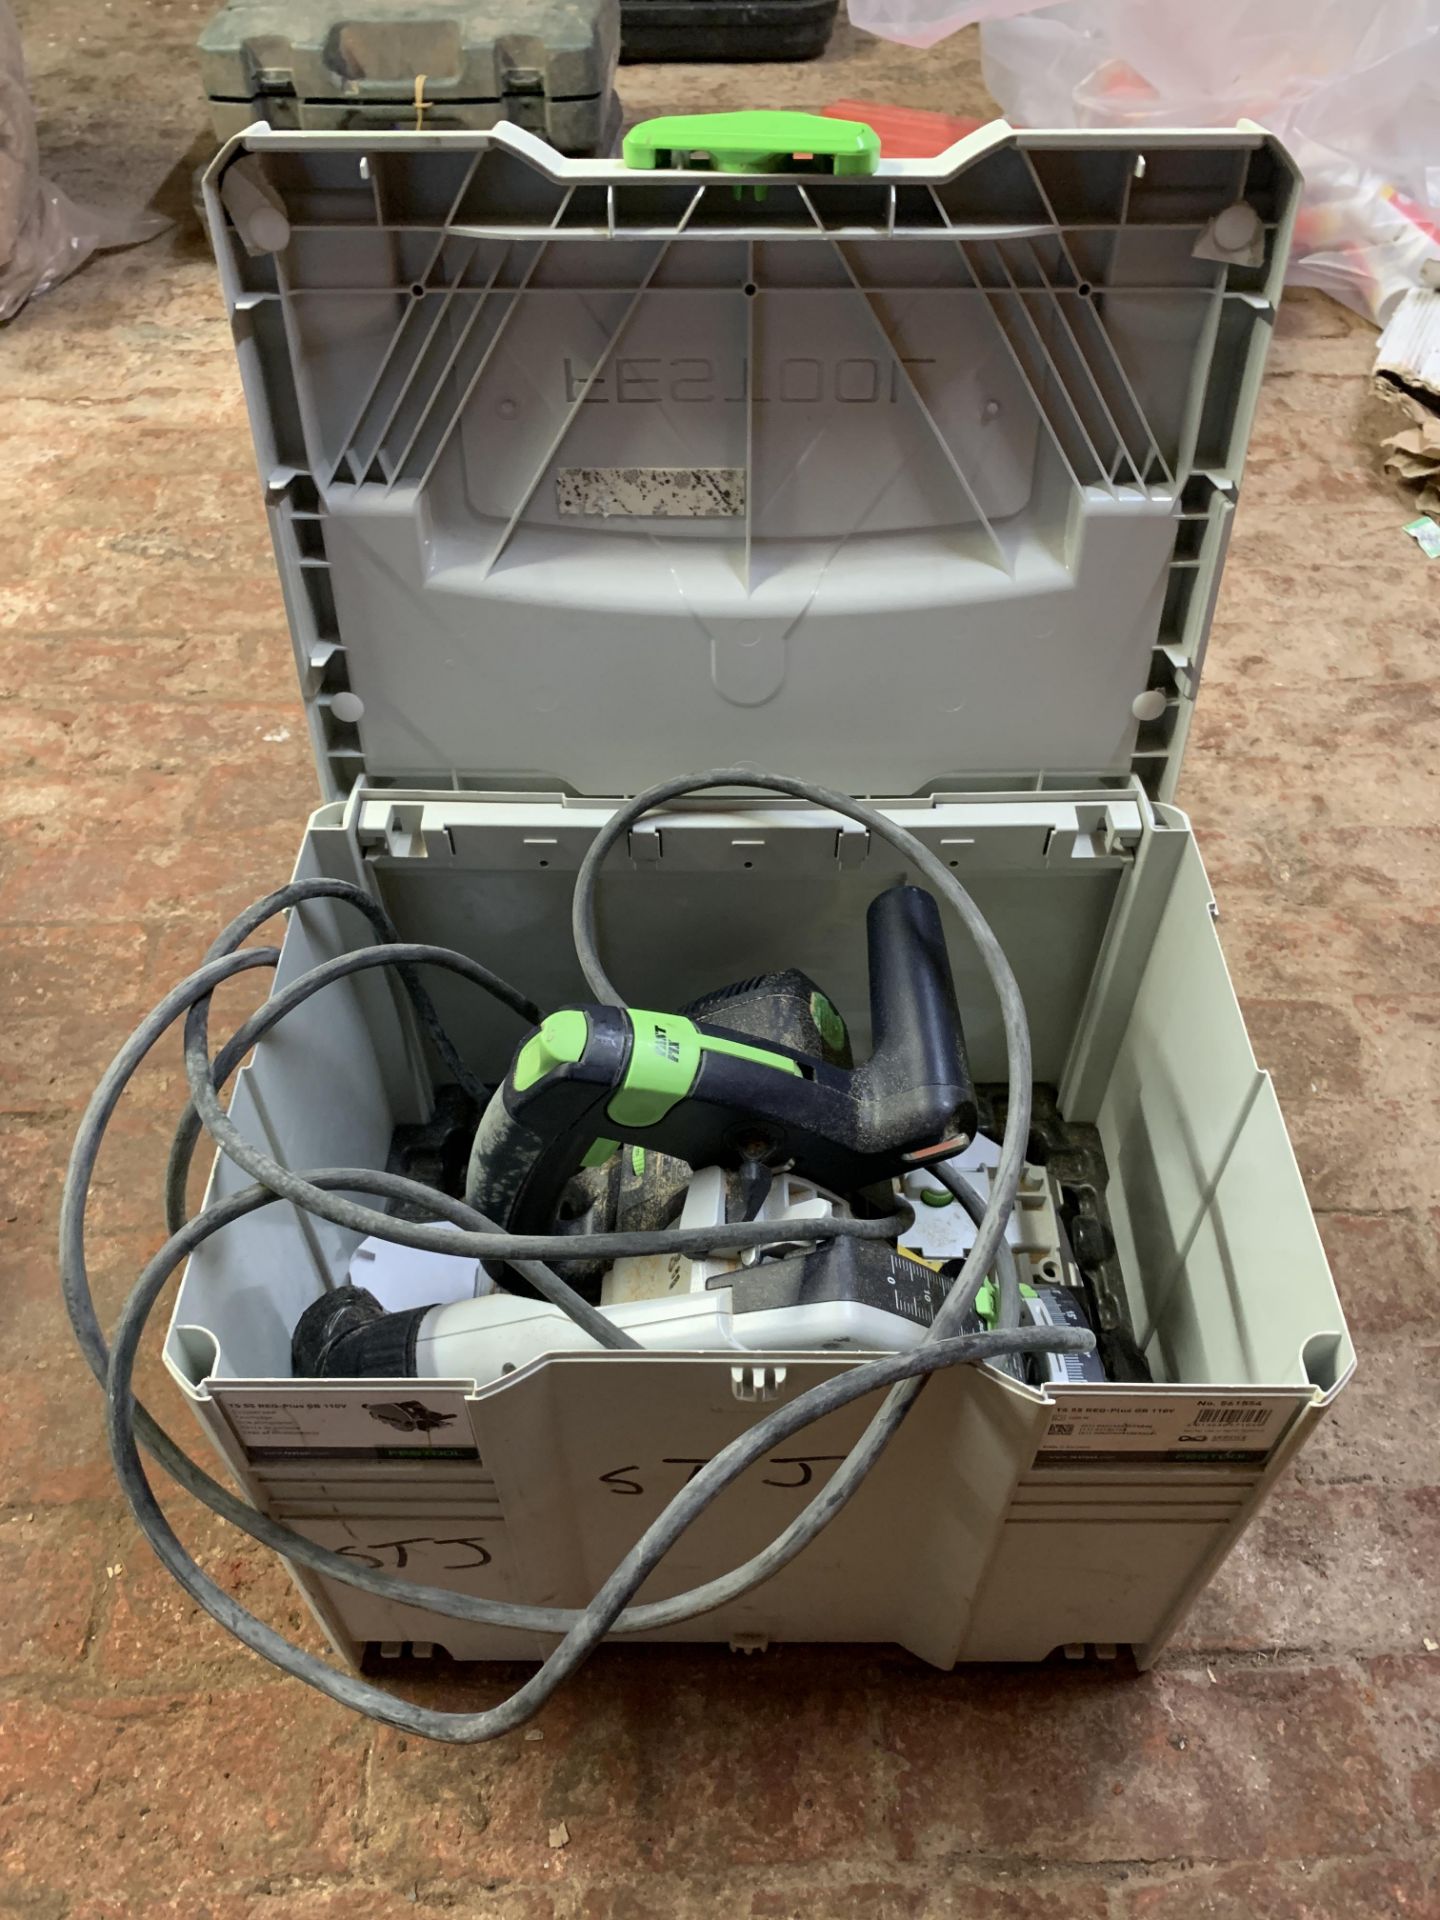 Festool TS55 Plunge Saw - 110V in Carry Case